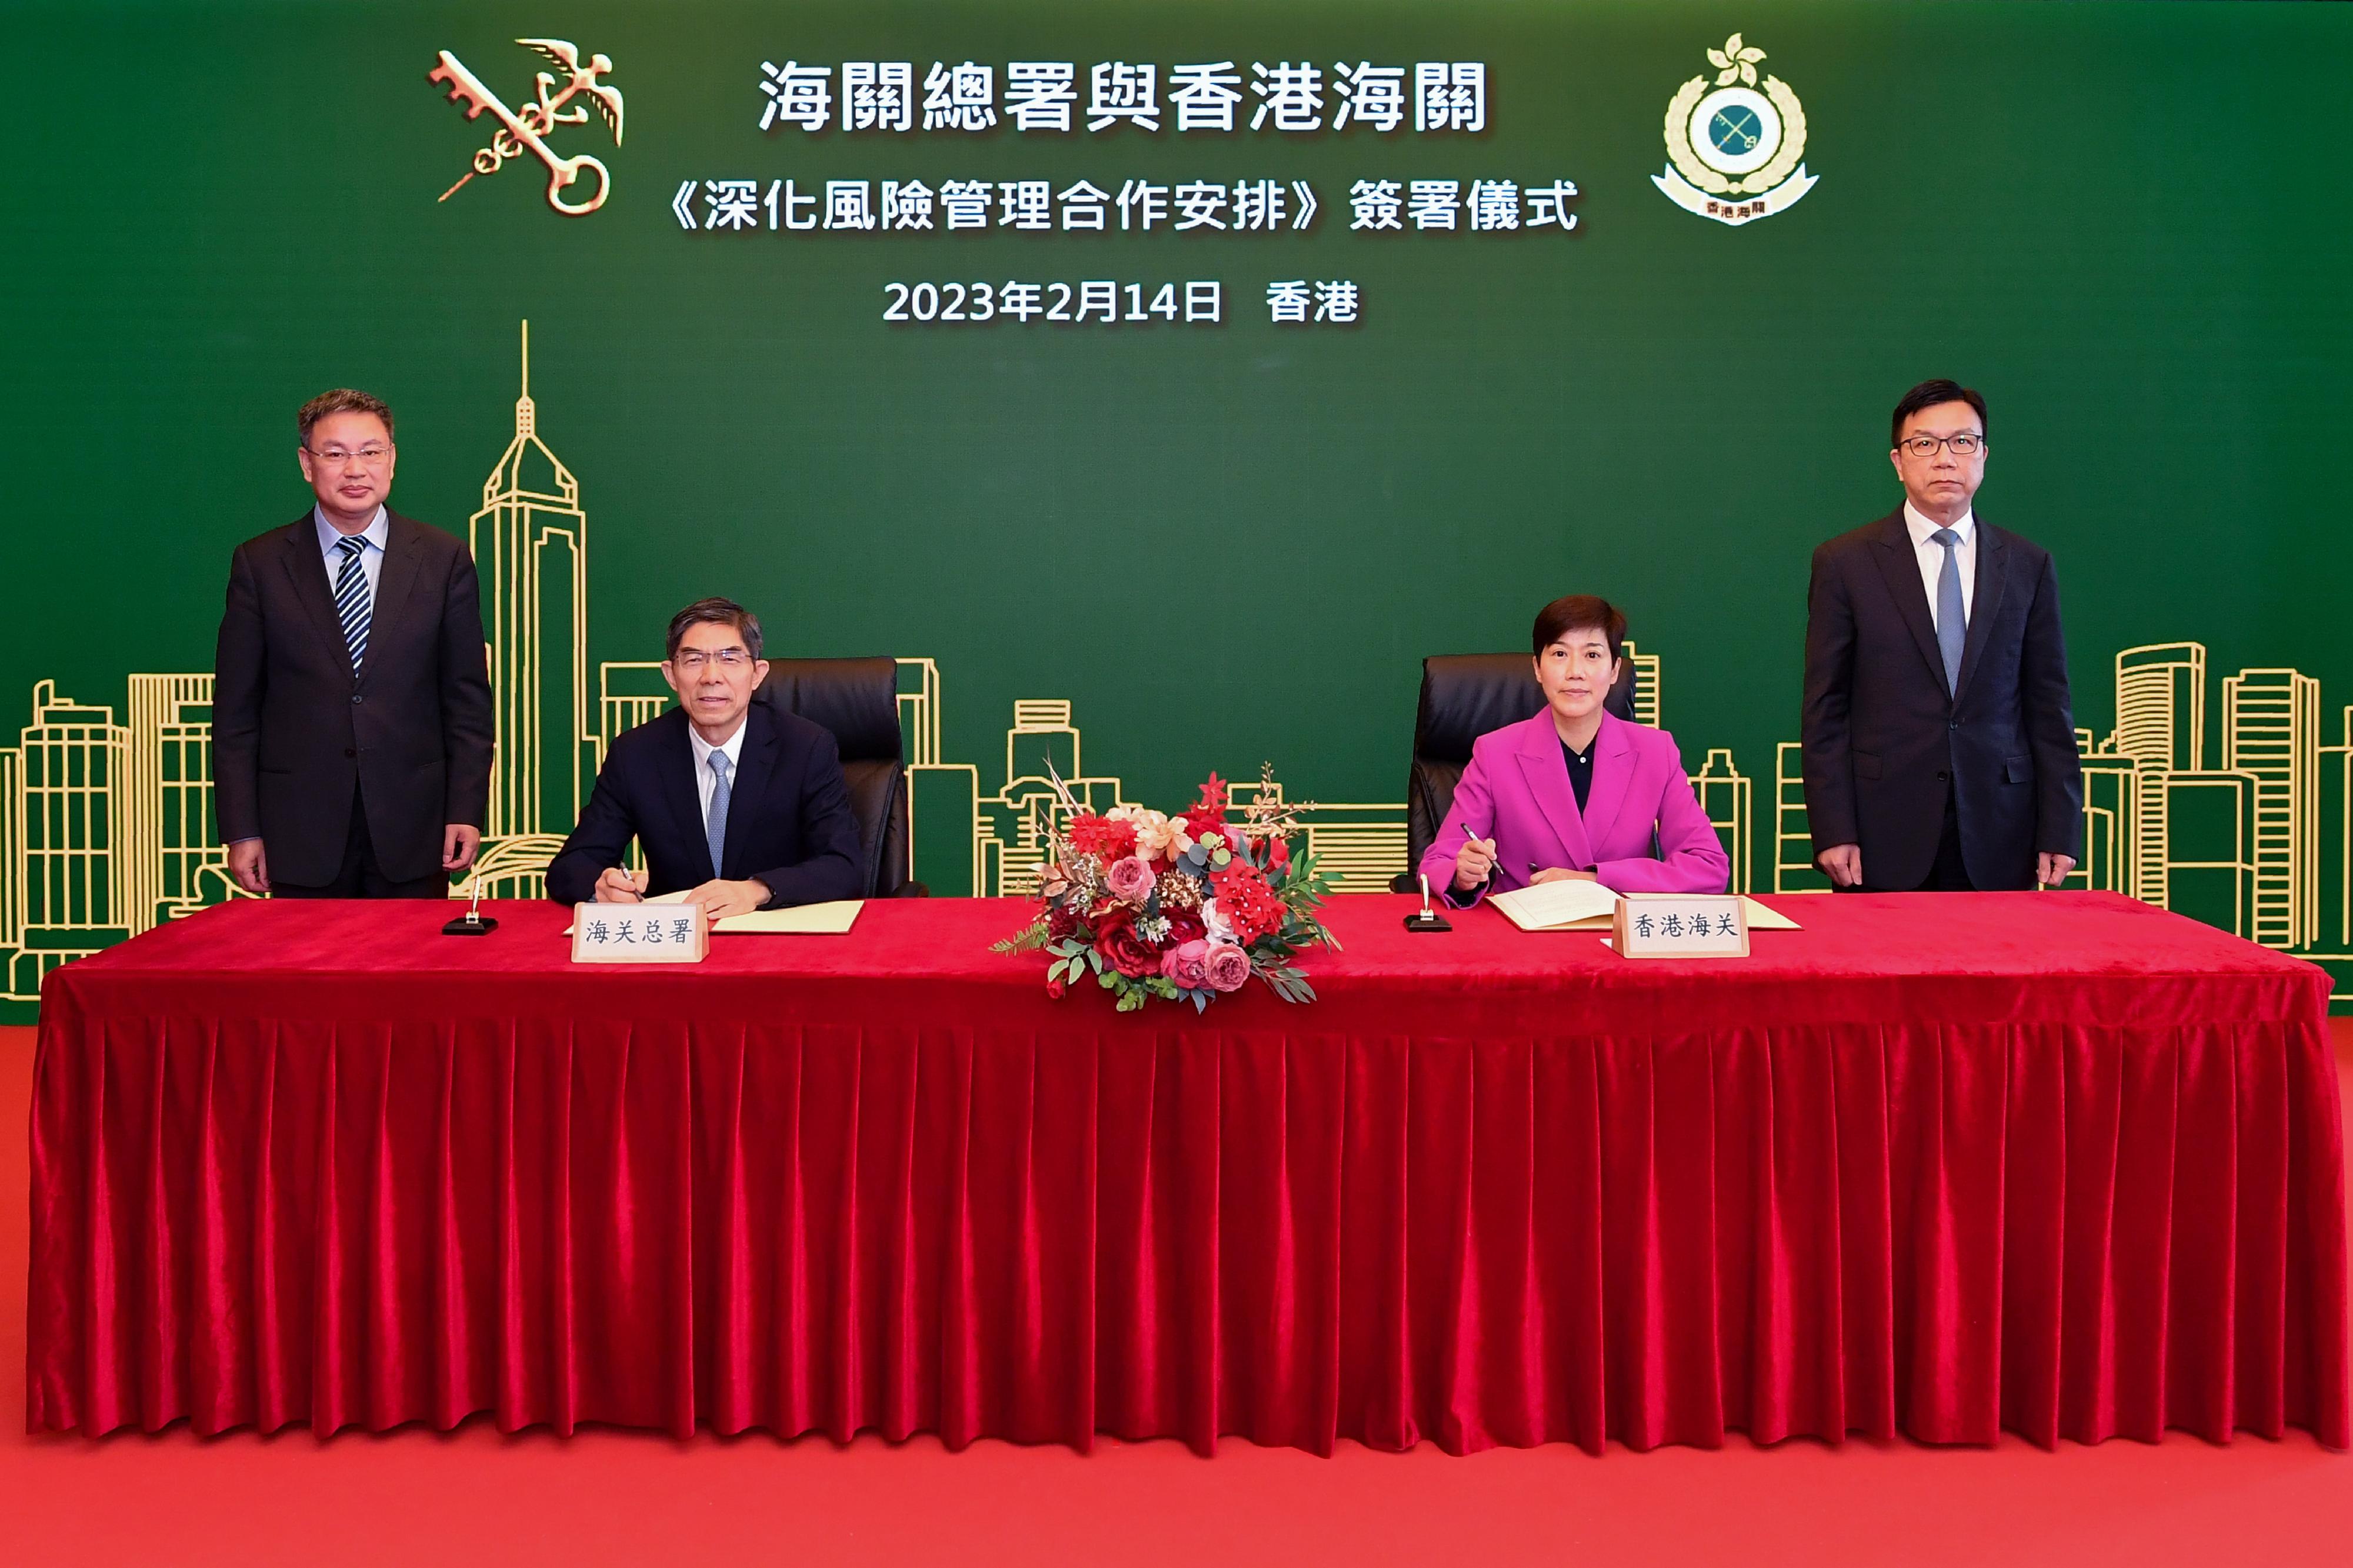 The Commissioner of Customs and Excise, Ms Louise Ho (second right), and the Vice-Minister of General Administration of Customs of the People’s Republic of China (GACC), Mr Wang Lingjun (second left), signed the Co-operative Arrangement on Deepening Risk Management Co-operation between the GACC and Hong Kong Customs in Hong Kong today (February 14). The Director General of the Department of International Cooperation of the GACC, Mr Zhou Wenyi (first left), and the Deputy Commissioner of Customs and Excise (Management and Strategic Development), Mr Ellis Lai (first right), witnessed the signing of Arrangement at the scene.